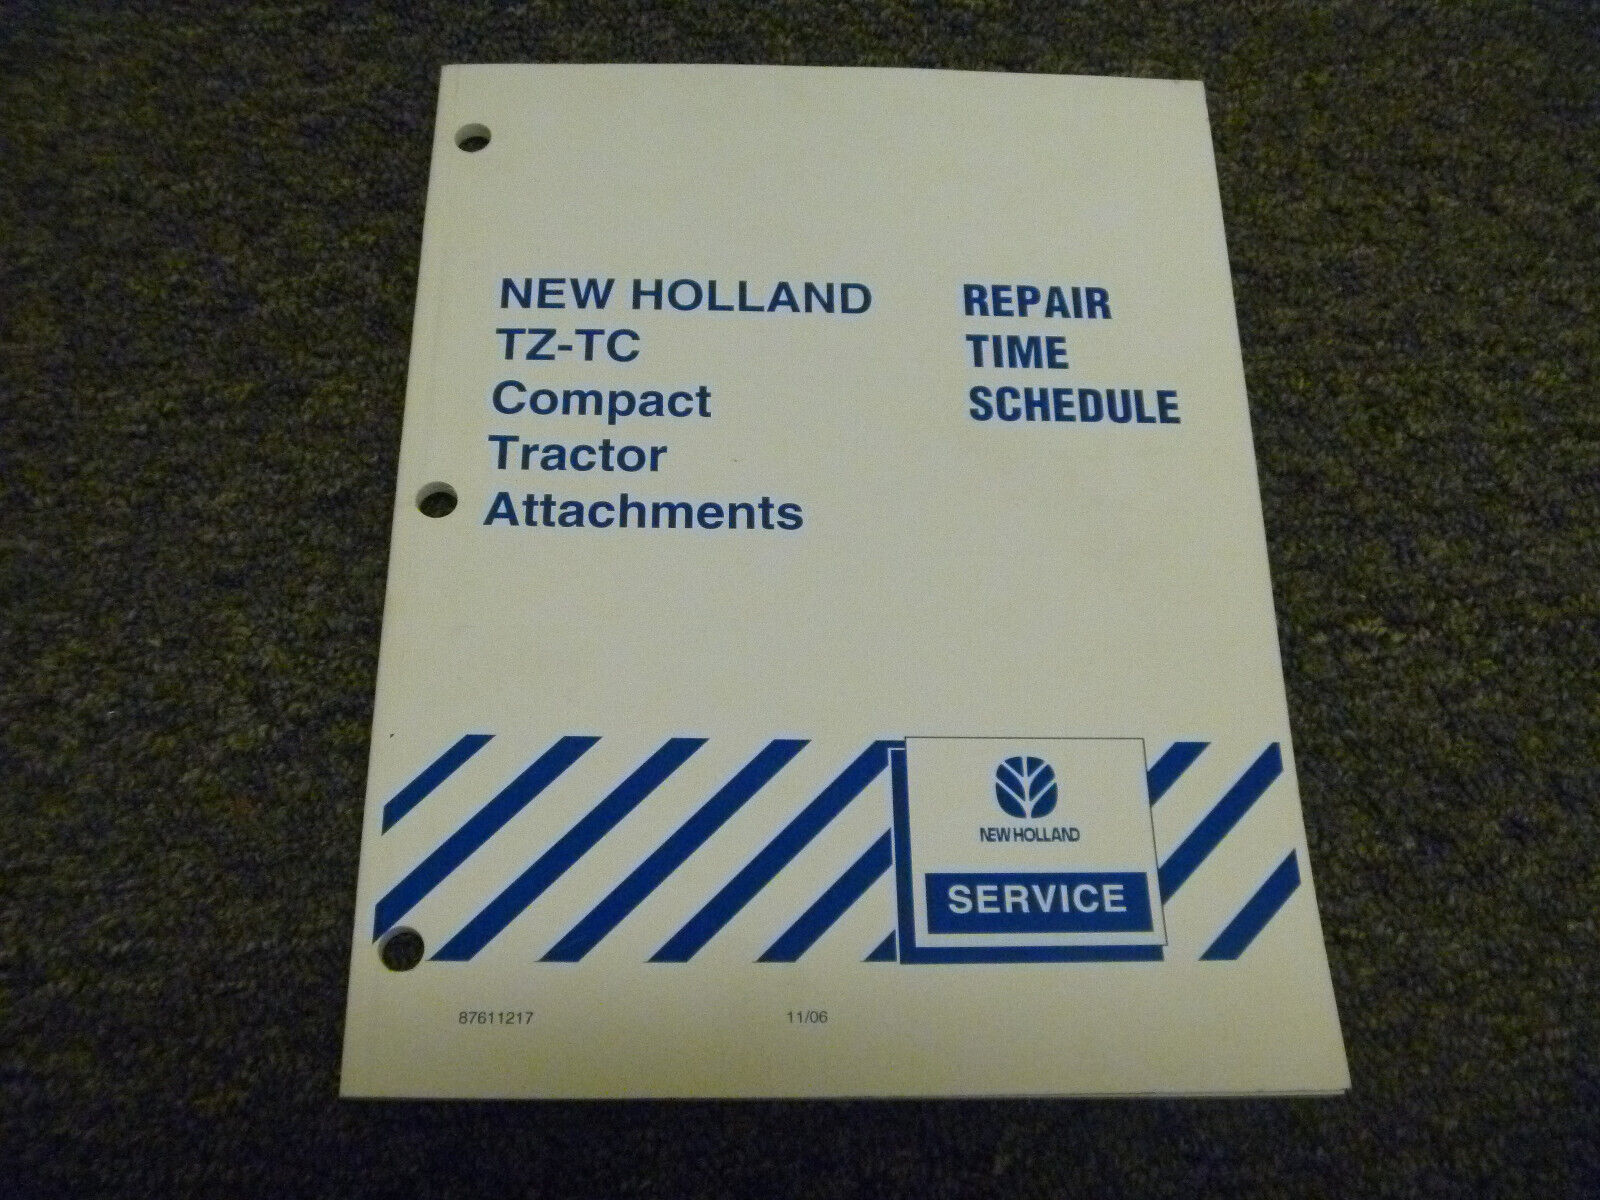 New Holland TZ-TC Compact Tractor Attachments Repair Time Schedule 87611217